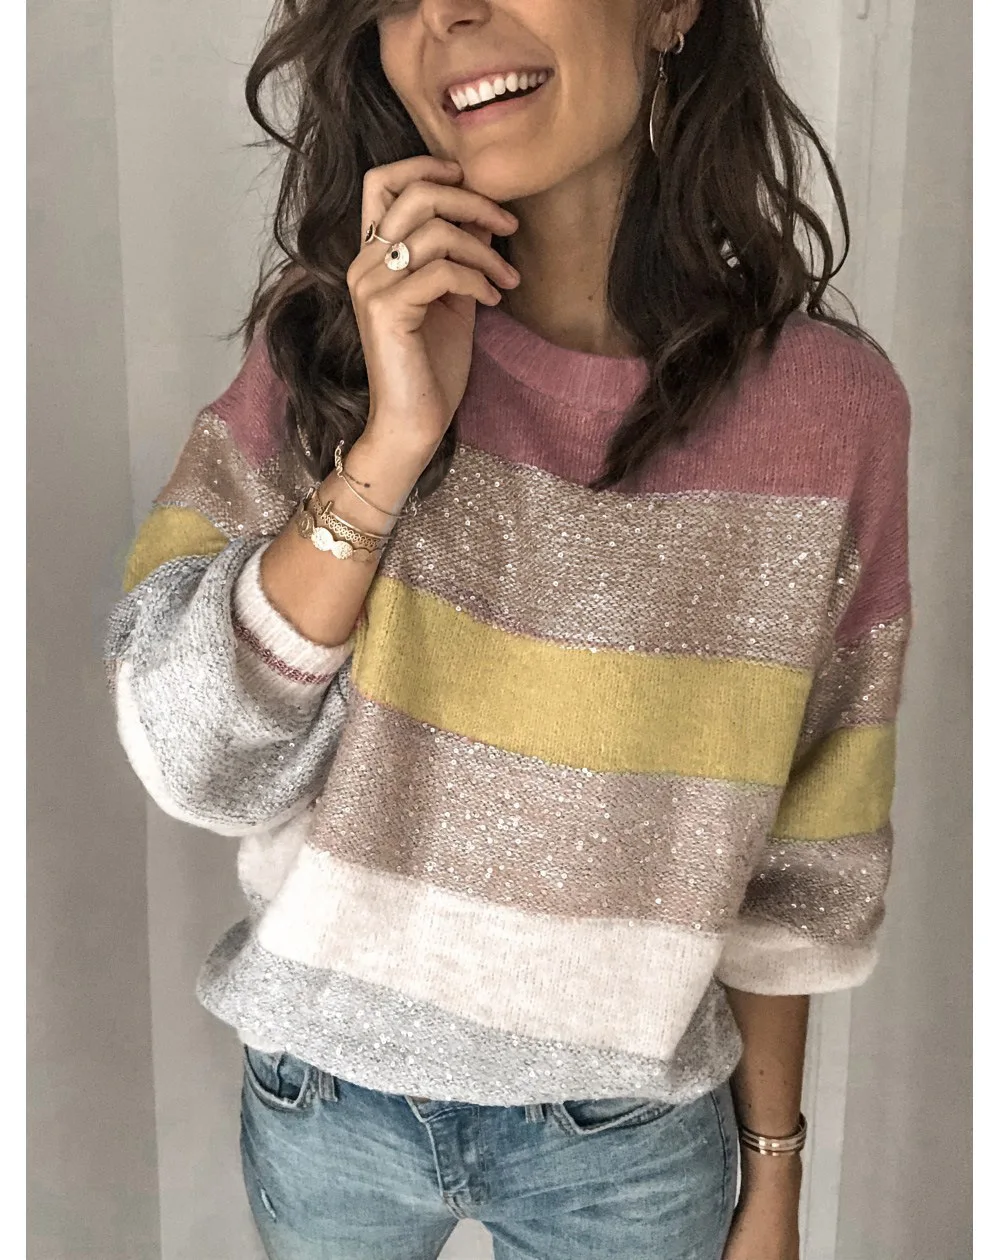 Plus Size Loose Casual Knit Sweater Women Autumn Female Pullover Long Sleeve Striped Knitted Sweaters Femme Elegant Clothes